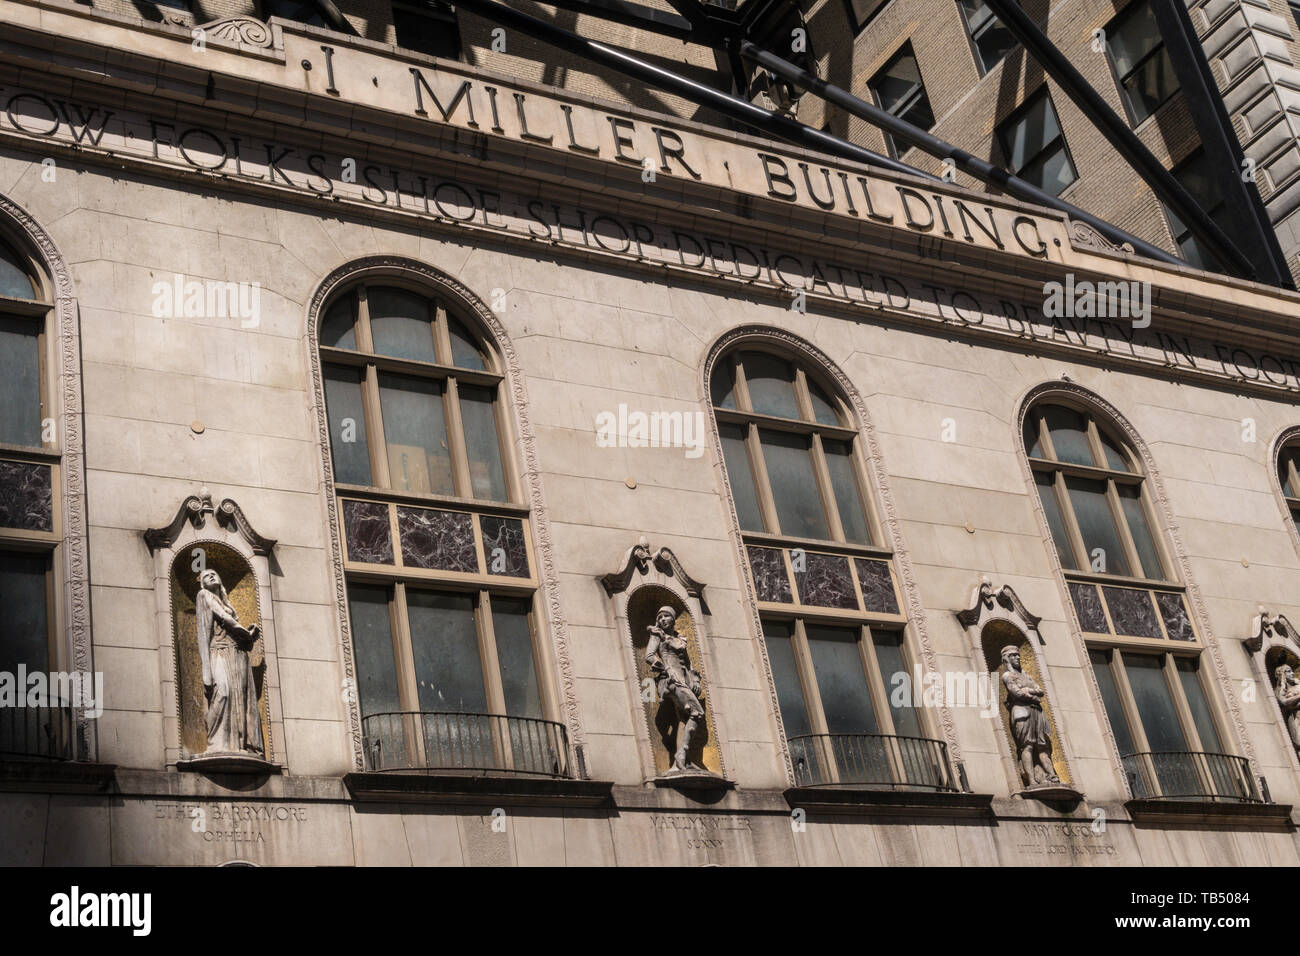 I. Miller Building, Times Square, NYC Stock Photo